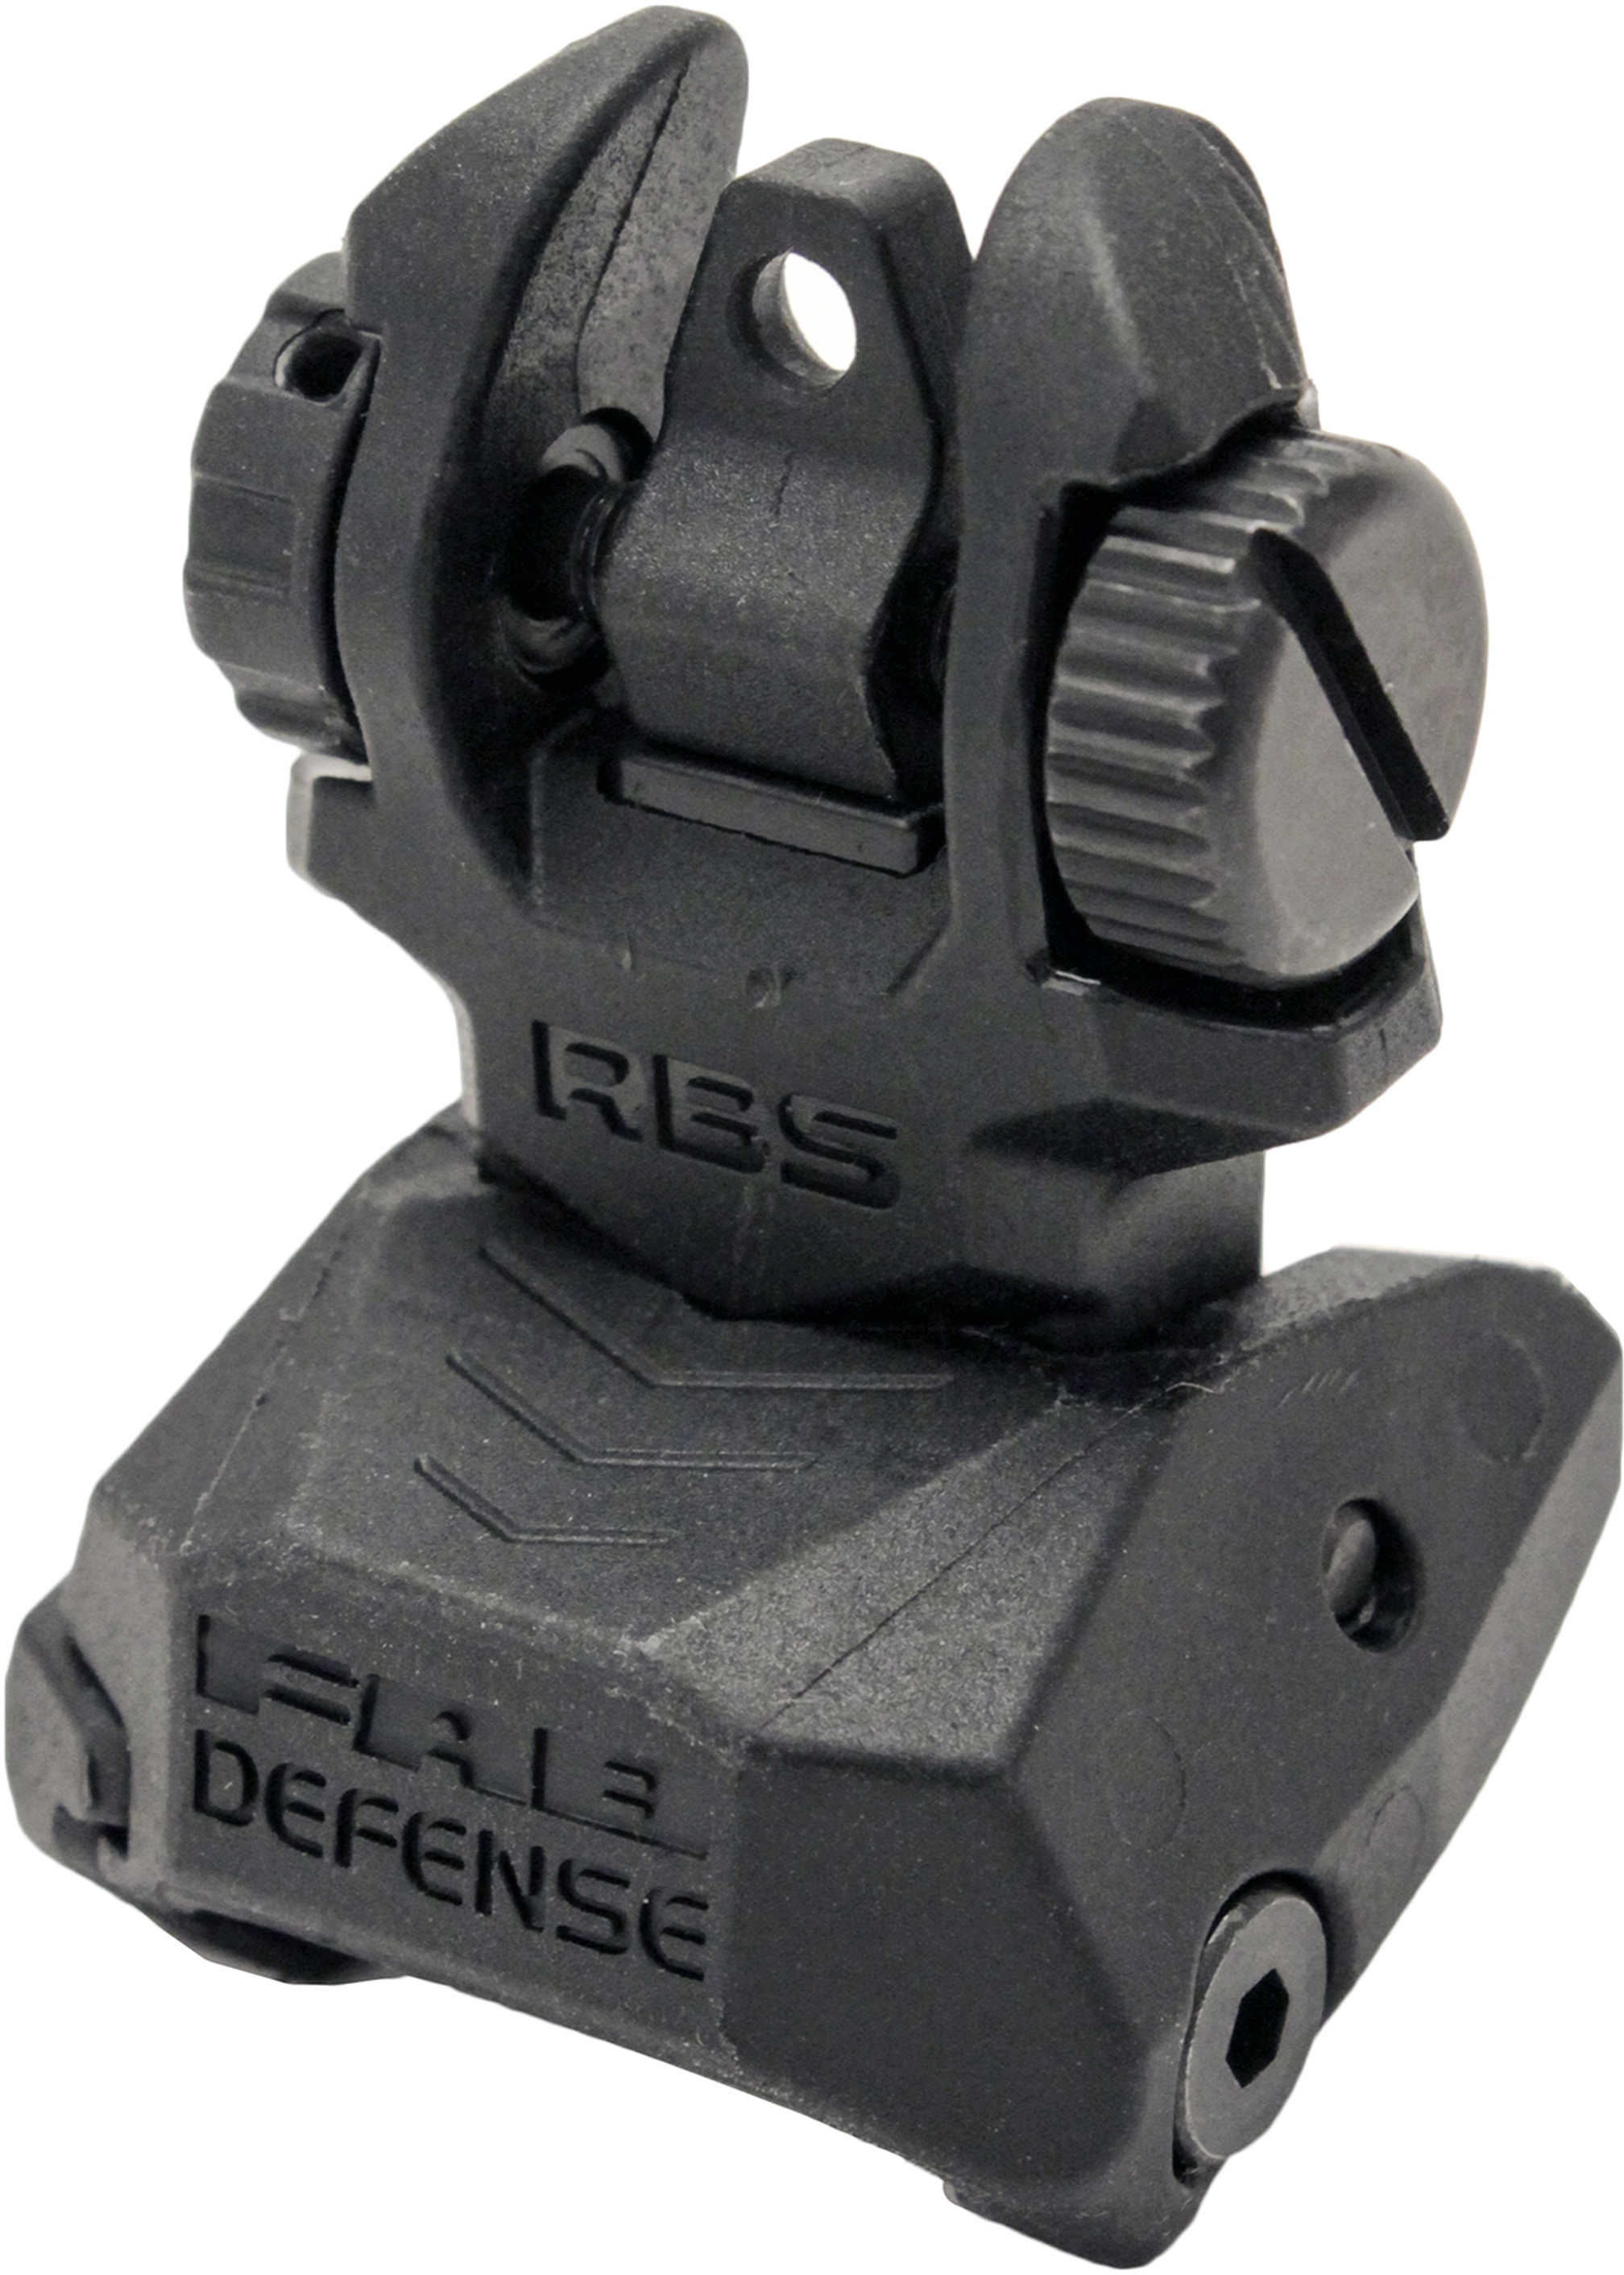 FAB Defense Sight Black Finish Rear Only with Flip Up Lens Covers RBS